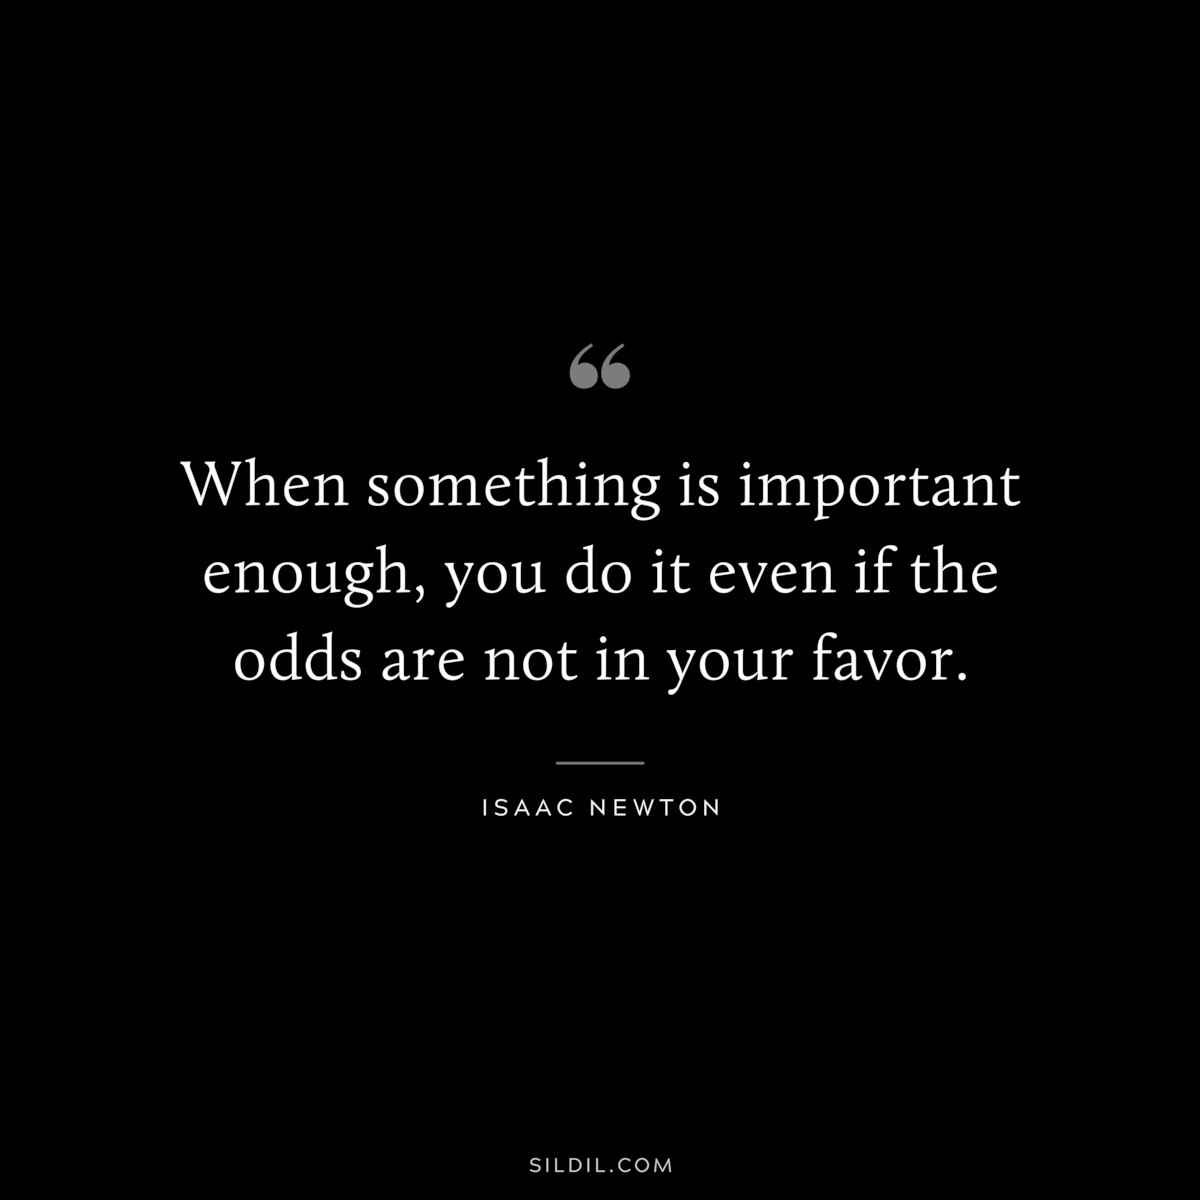 When something is important enough, you do it even if the odds are not in your favor. ― Elon Musk